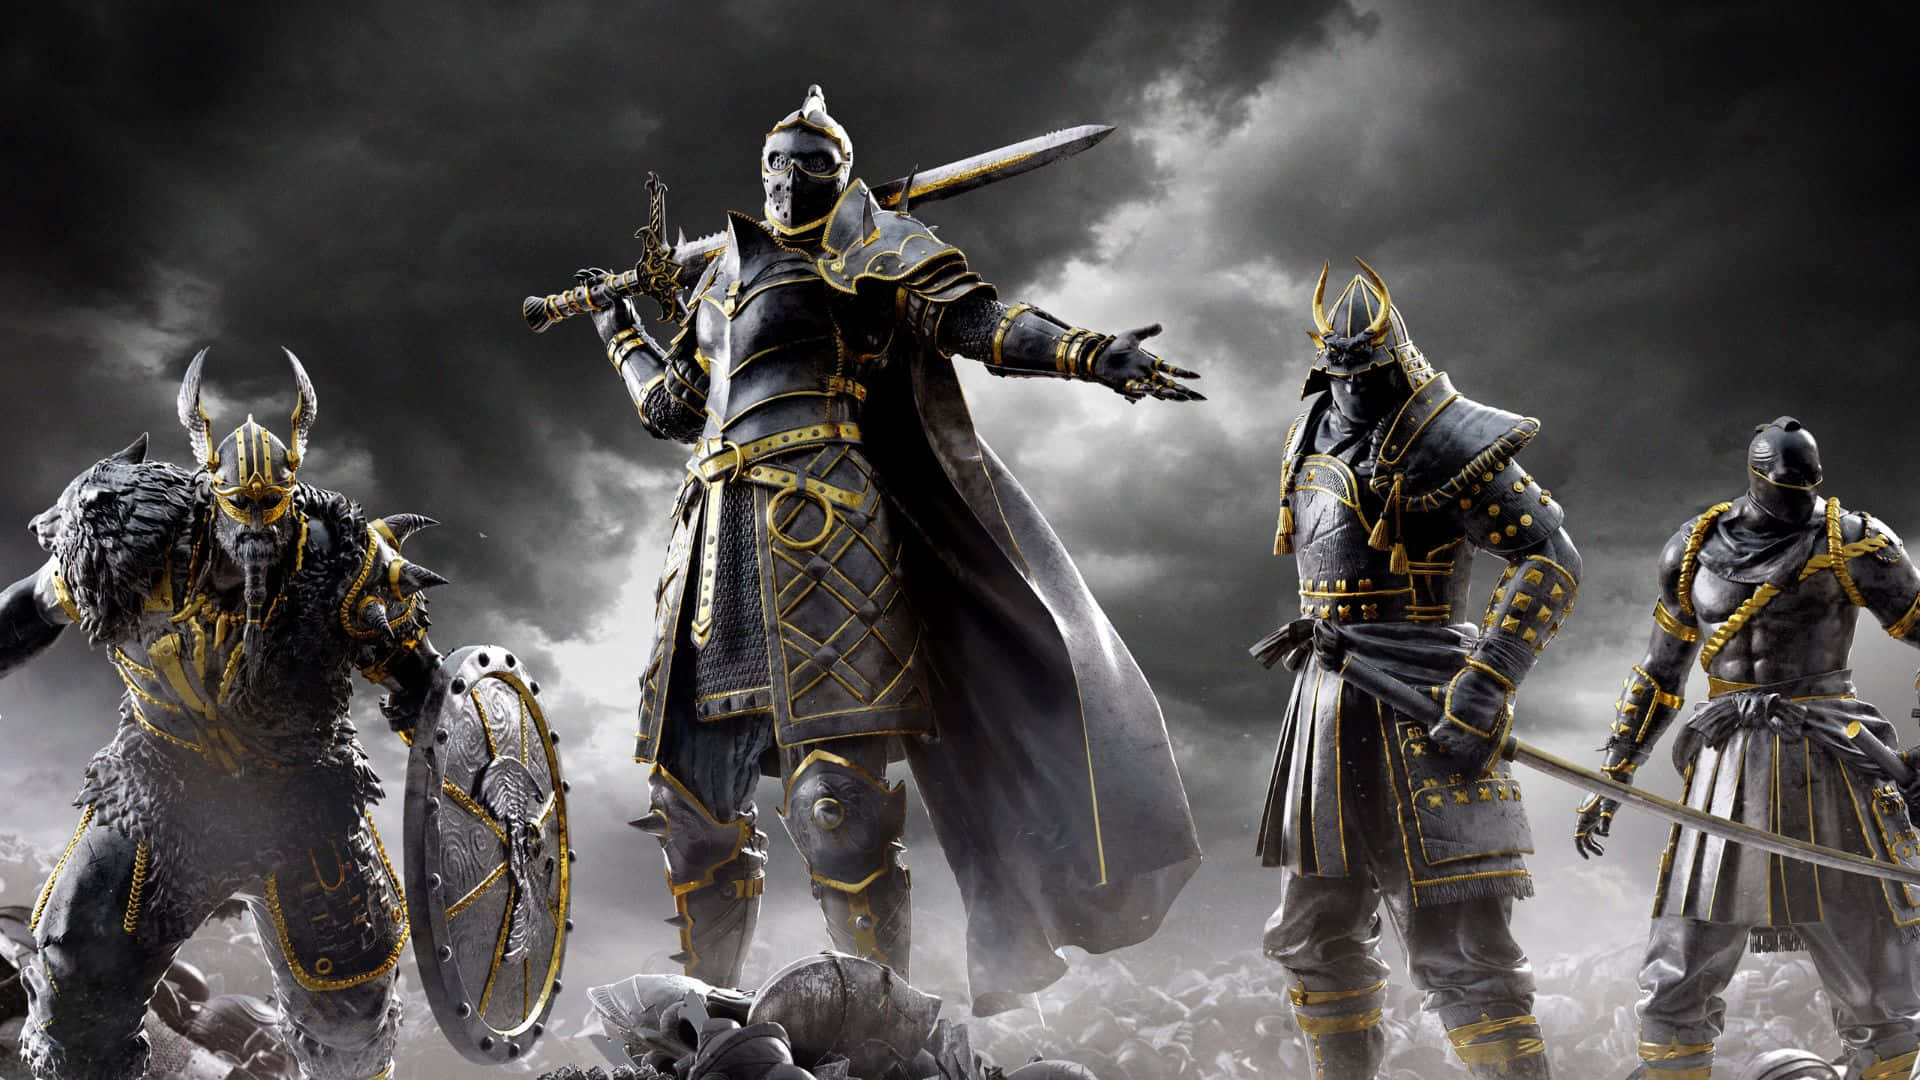 1080p For Honor Background Different Warriors In Dark Grey And Gold